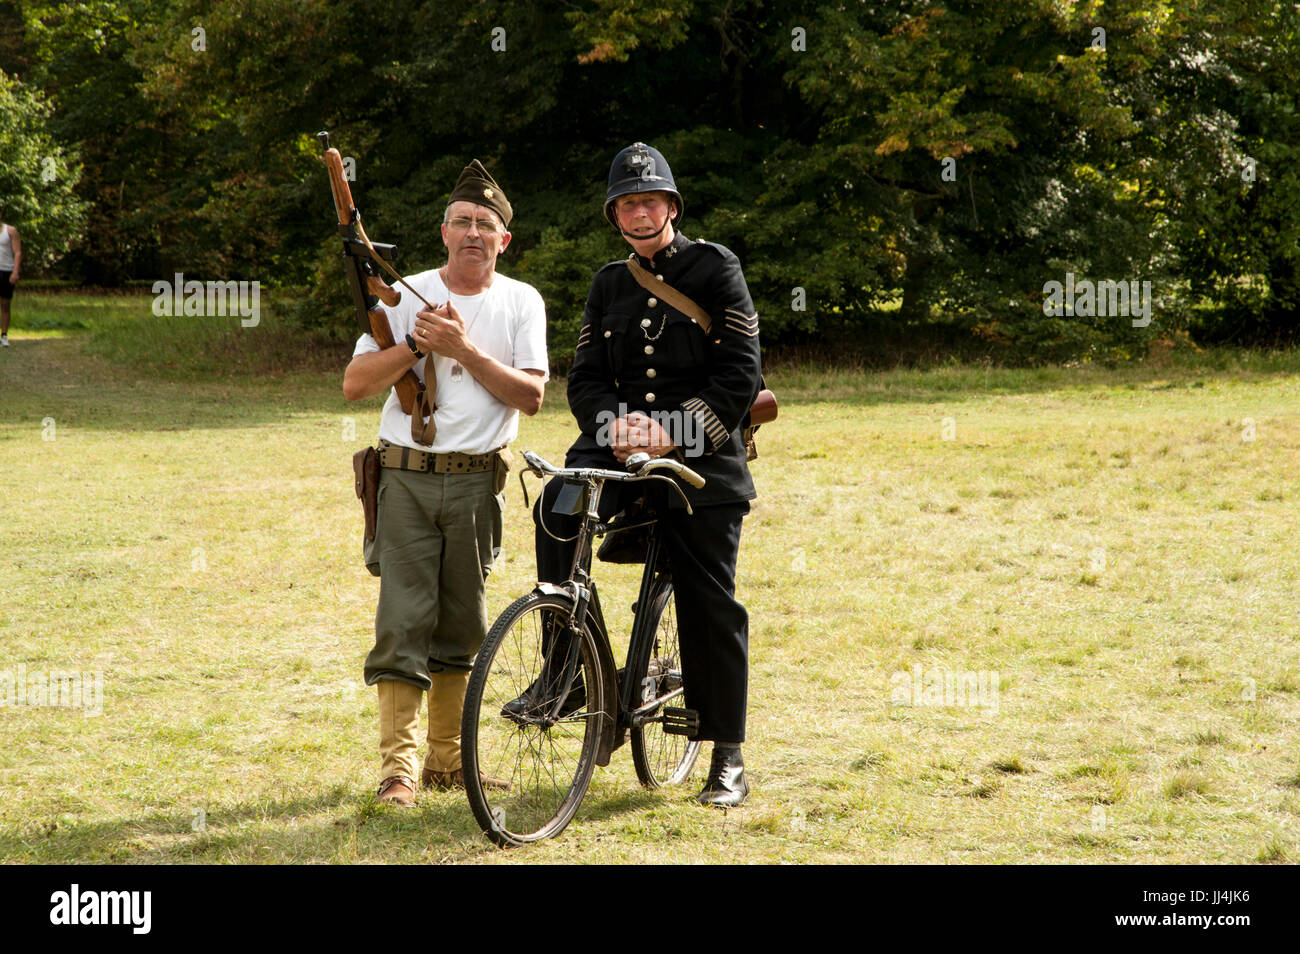 Images taken from WW2 re-enactment of Home Guard using authentic clothing, vehicles, flags, ammunition, guns, bikes, tents and other WW2 memorabilia. Stock Photo